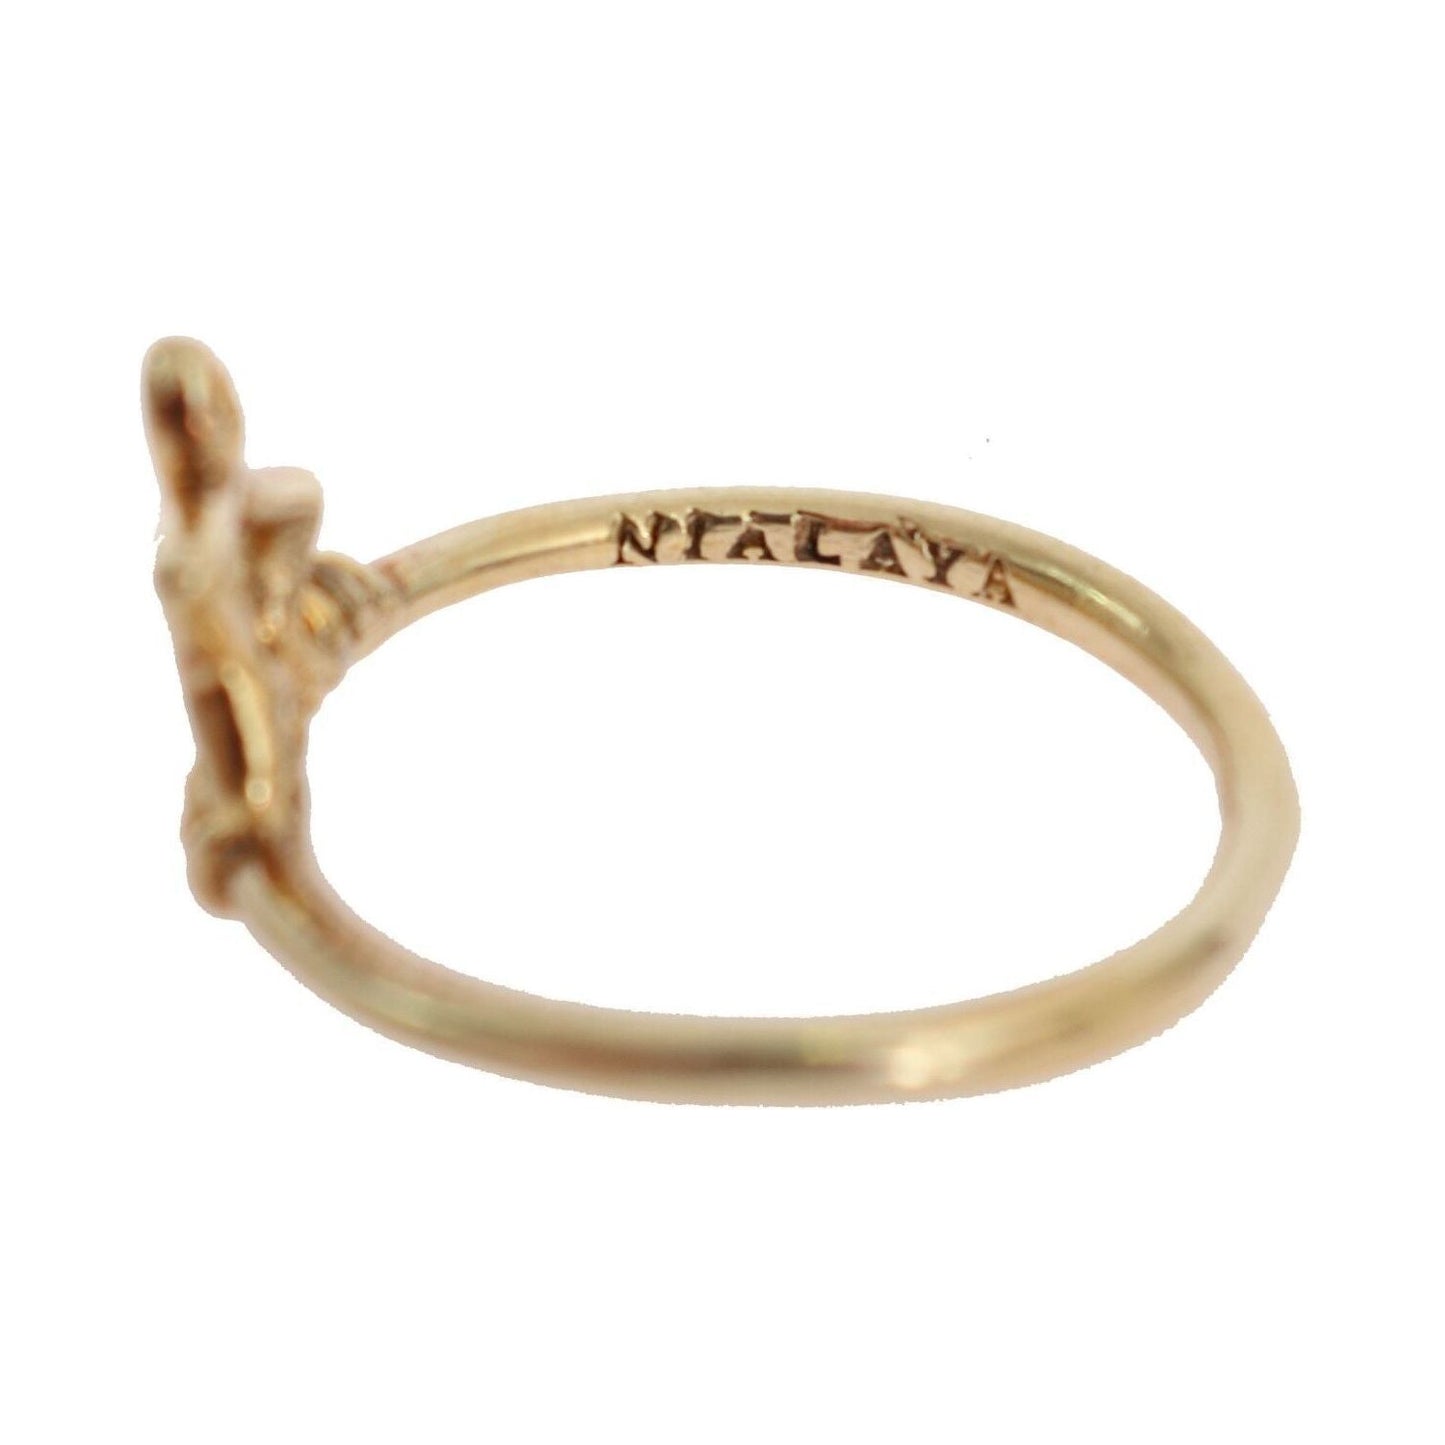 Nialaya Elegant Gold-Plated Sterling Silver Ring Ring gold-925-silver-authentic-star-ring s-l1600-2022-10-06T150219.143-b02d9d1e-5b8.jpg